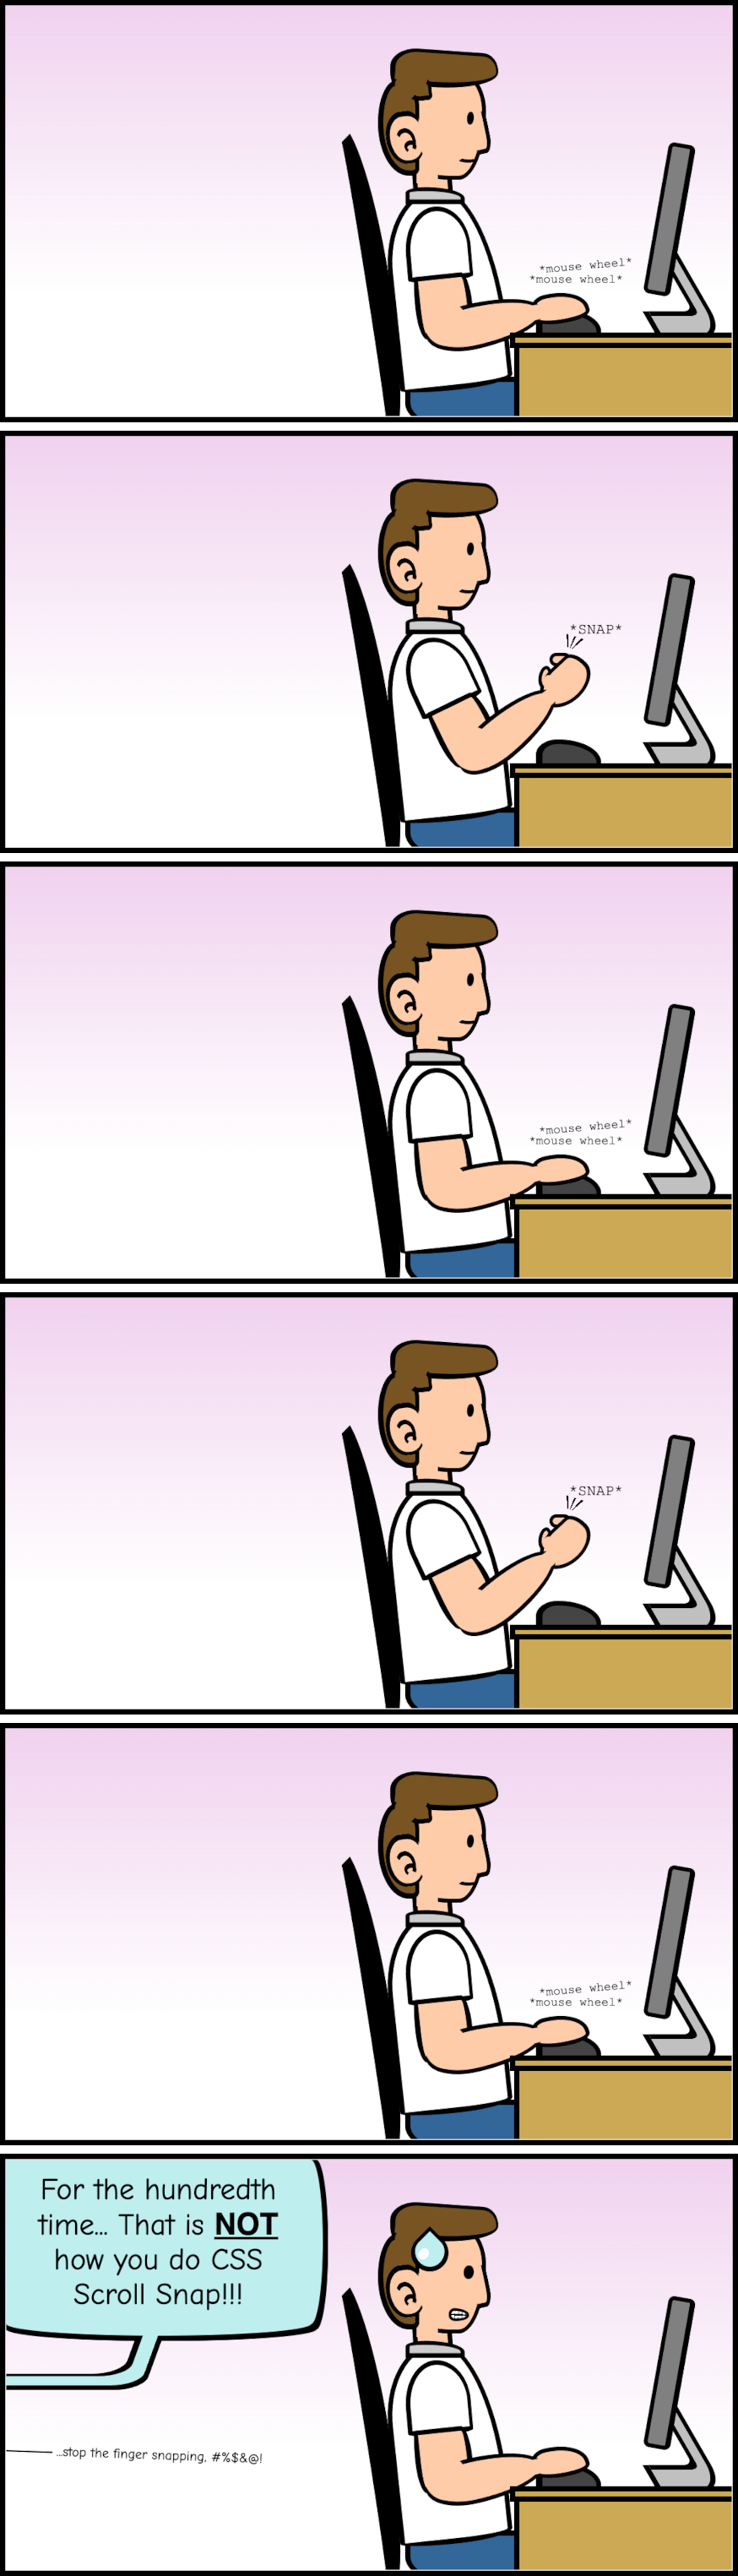 Comic strip with 6 stacked panels. The first, third, and fifth one show a man scrolling a mouse in front of the computer. The second and fourth show the man snapping his fingers. The sixth shows the man worried as someones says 'that's not how you do scroll snap!'